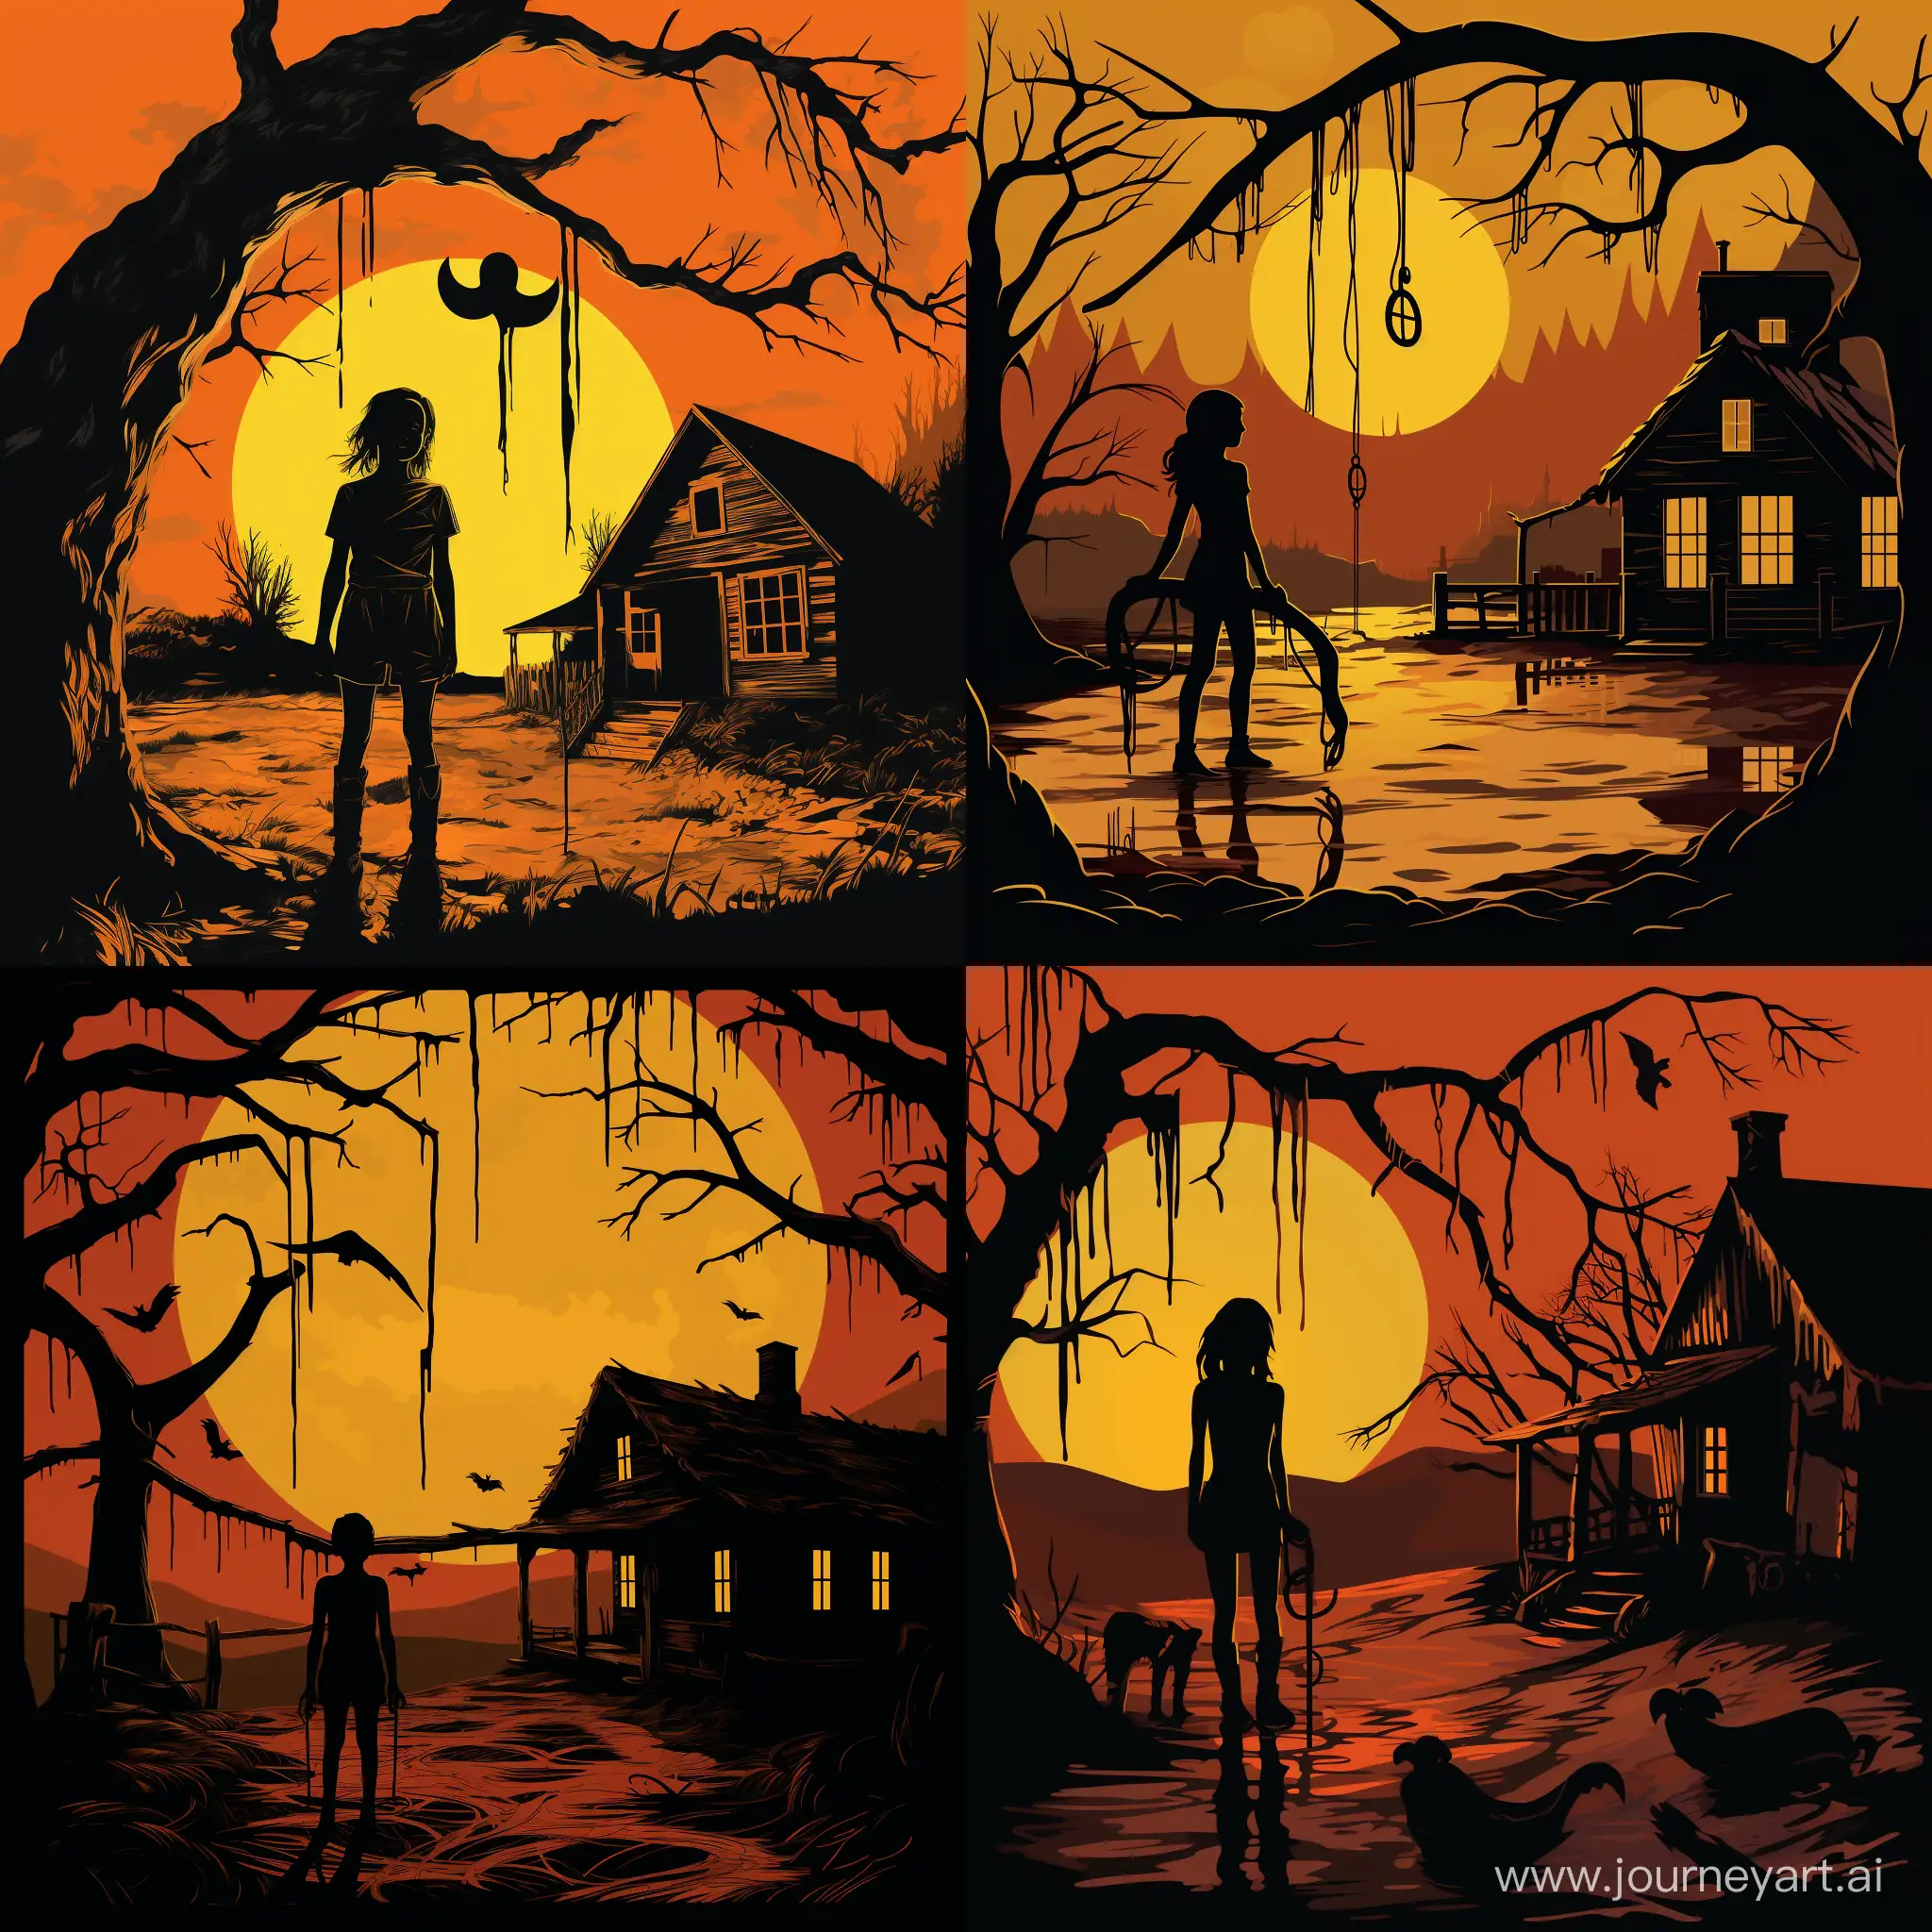 In the spooky night, a girl stands, gripping animal bones. Behind her, a haunted farmhouse looms, its eerie silhouette against a dark yellow sky. A tree with a tire swing adds a haunting touch to the background. The scene is bathed in dark amber hues, creating a mysterious and sublime atmosphere. The style draws inspiration from pop culture references, incorporating elements of "McDonaldpunk" and journalistic cartoons. The girl's face is concealed in a dark shadow, adding to the enigma. Animals lurk around her, adding intricate details to this haunting and high-definition tableau